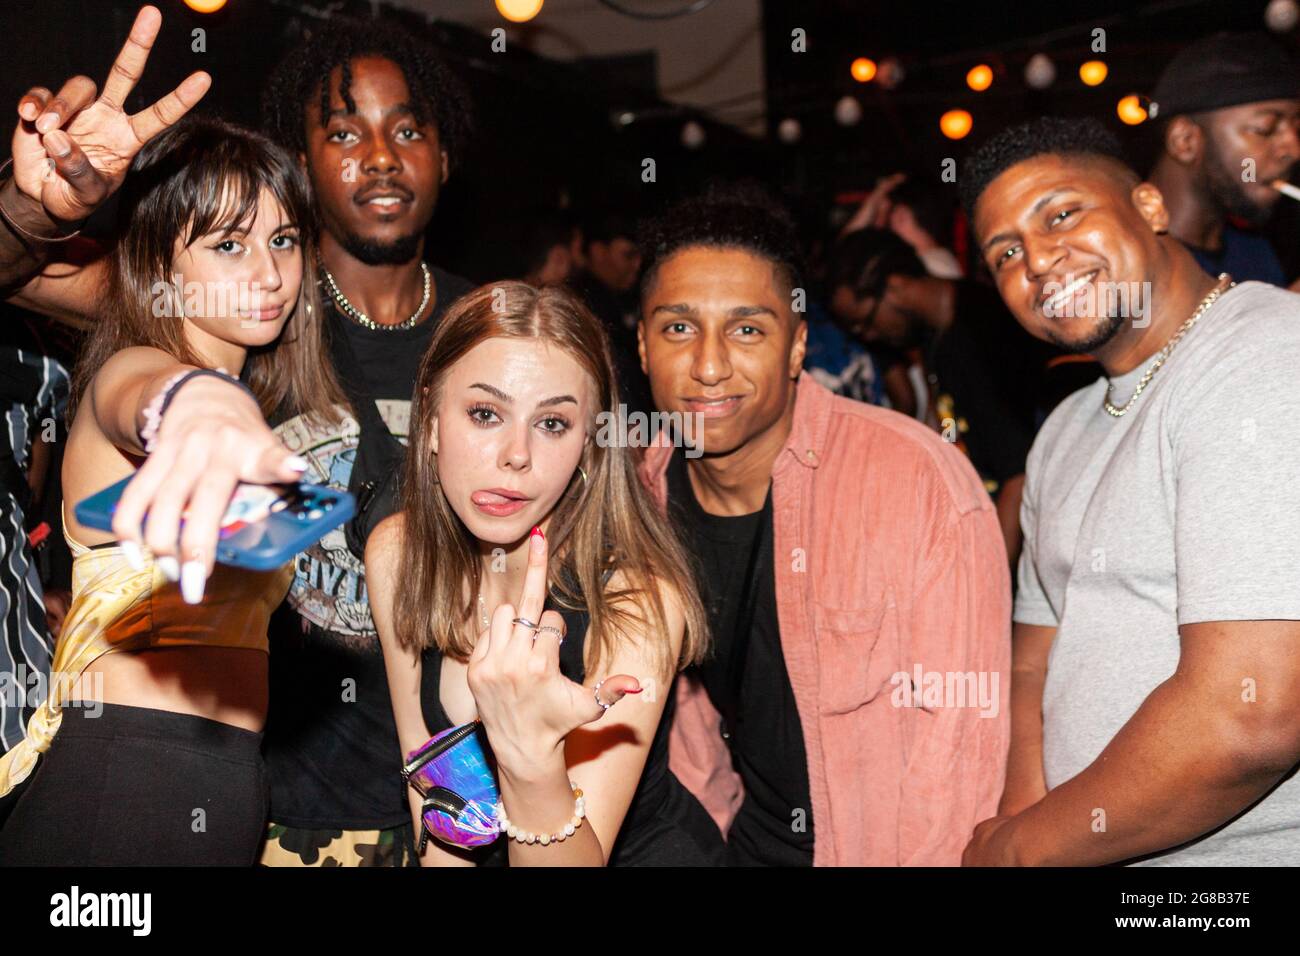 London, England. 18 Jul 2021. Clubgoers on opening night in the smoking area of Orange Yard, finally conversing without masks, and partying in public spaces. Credit: Stefan Weil/Alamy Live News Stock Photo